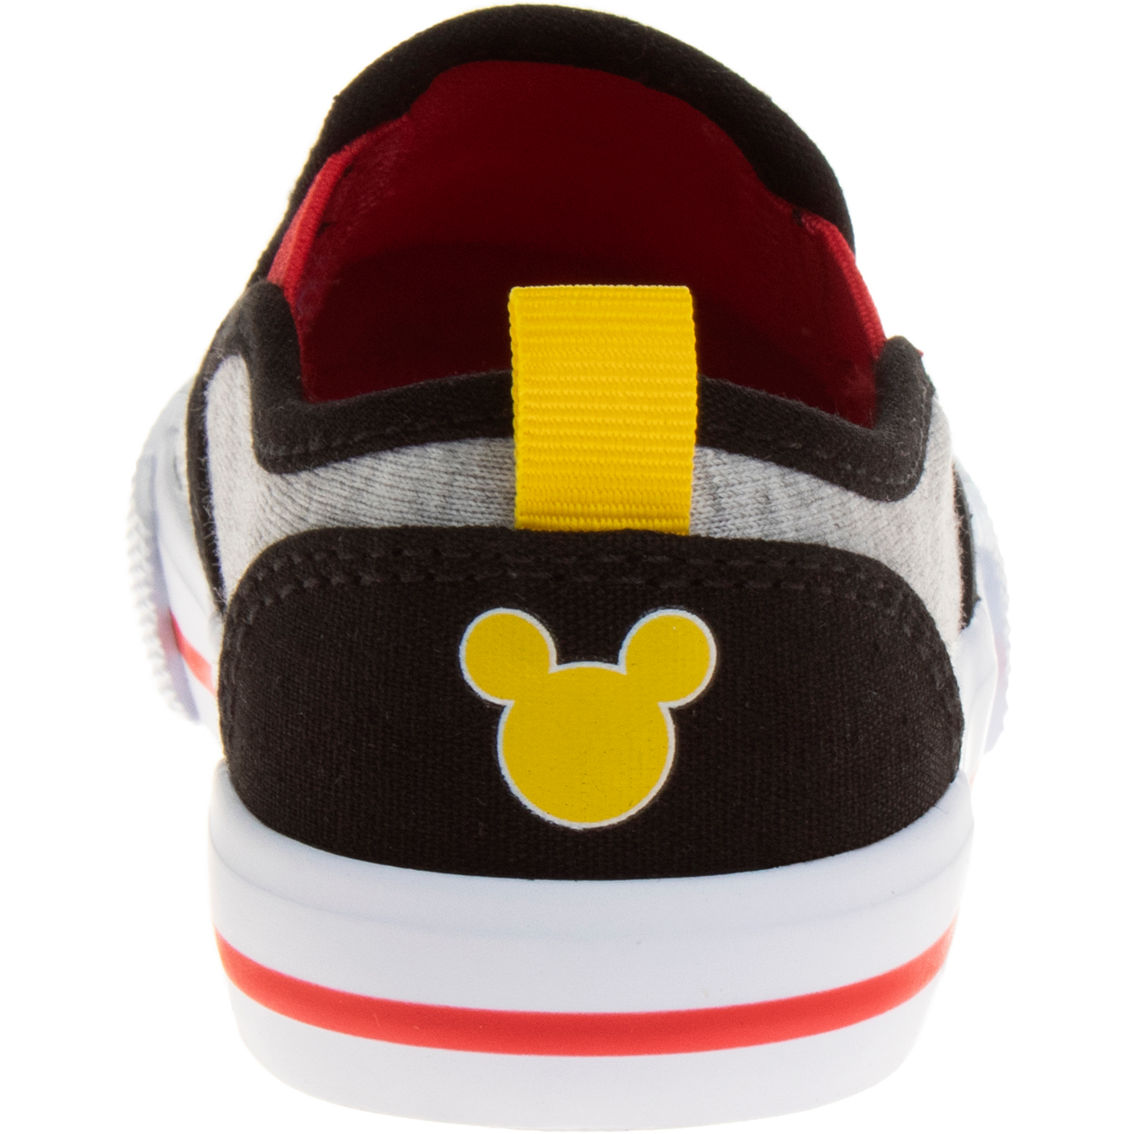 Mickey Mouse Toddler Boys Slip On Sneakers - Image 4 of 5